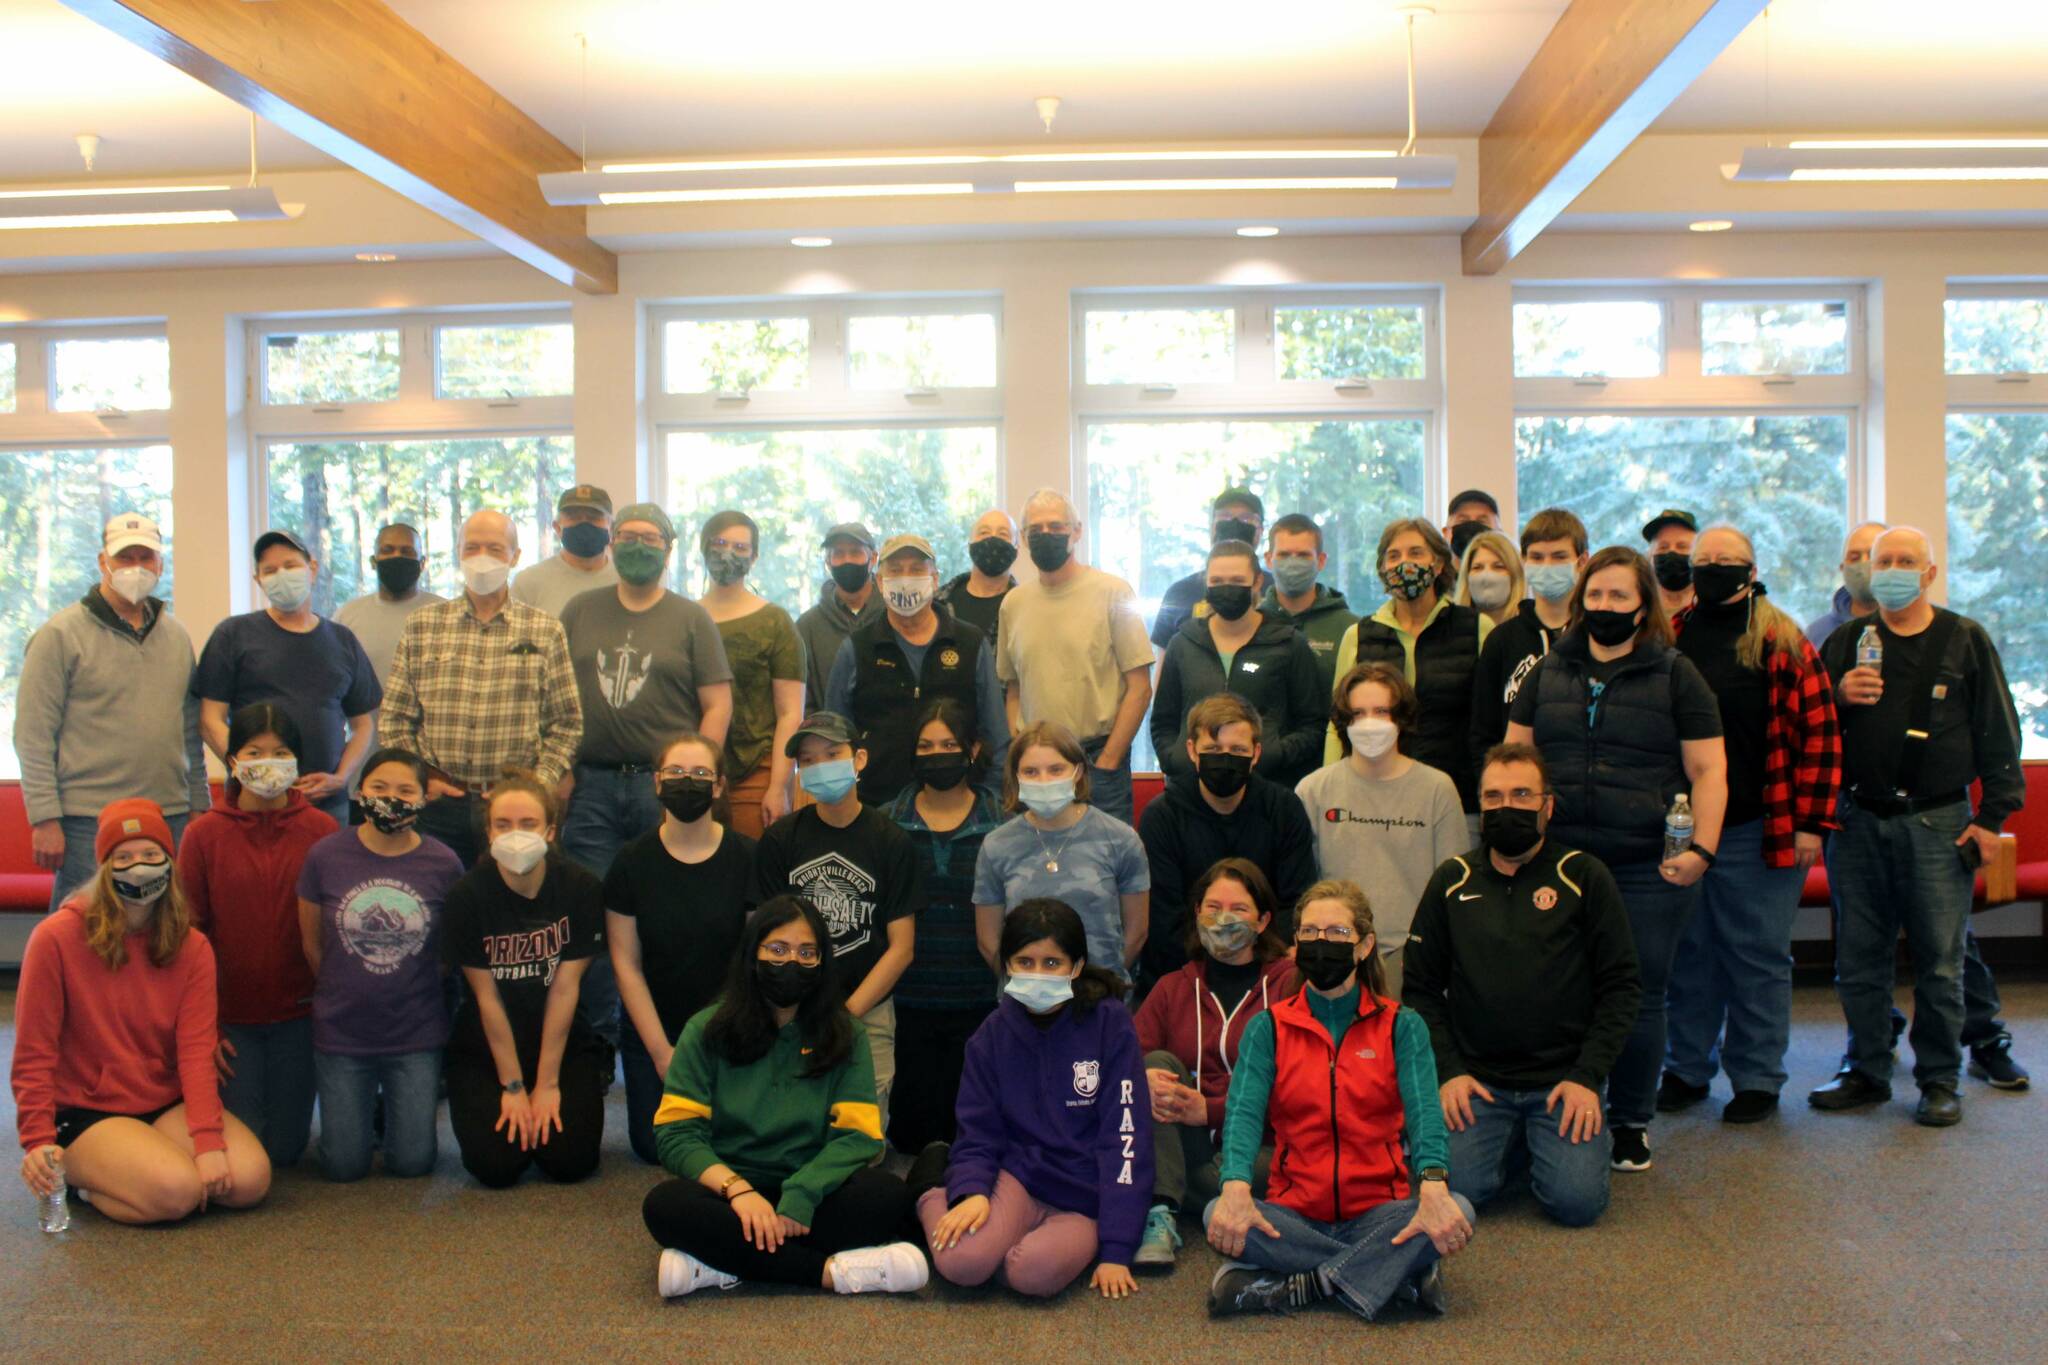 After a day of cleaning, volunteers gathered for a picture at Chapel by the Lake on Jan. 17. (Dana Zigmund/Juneau Empire)